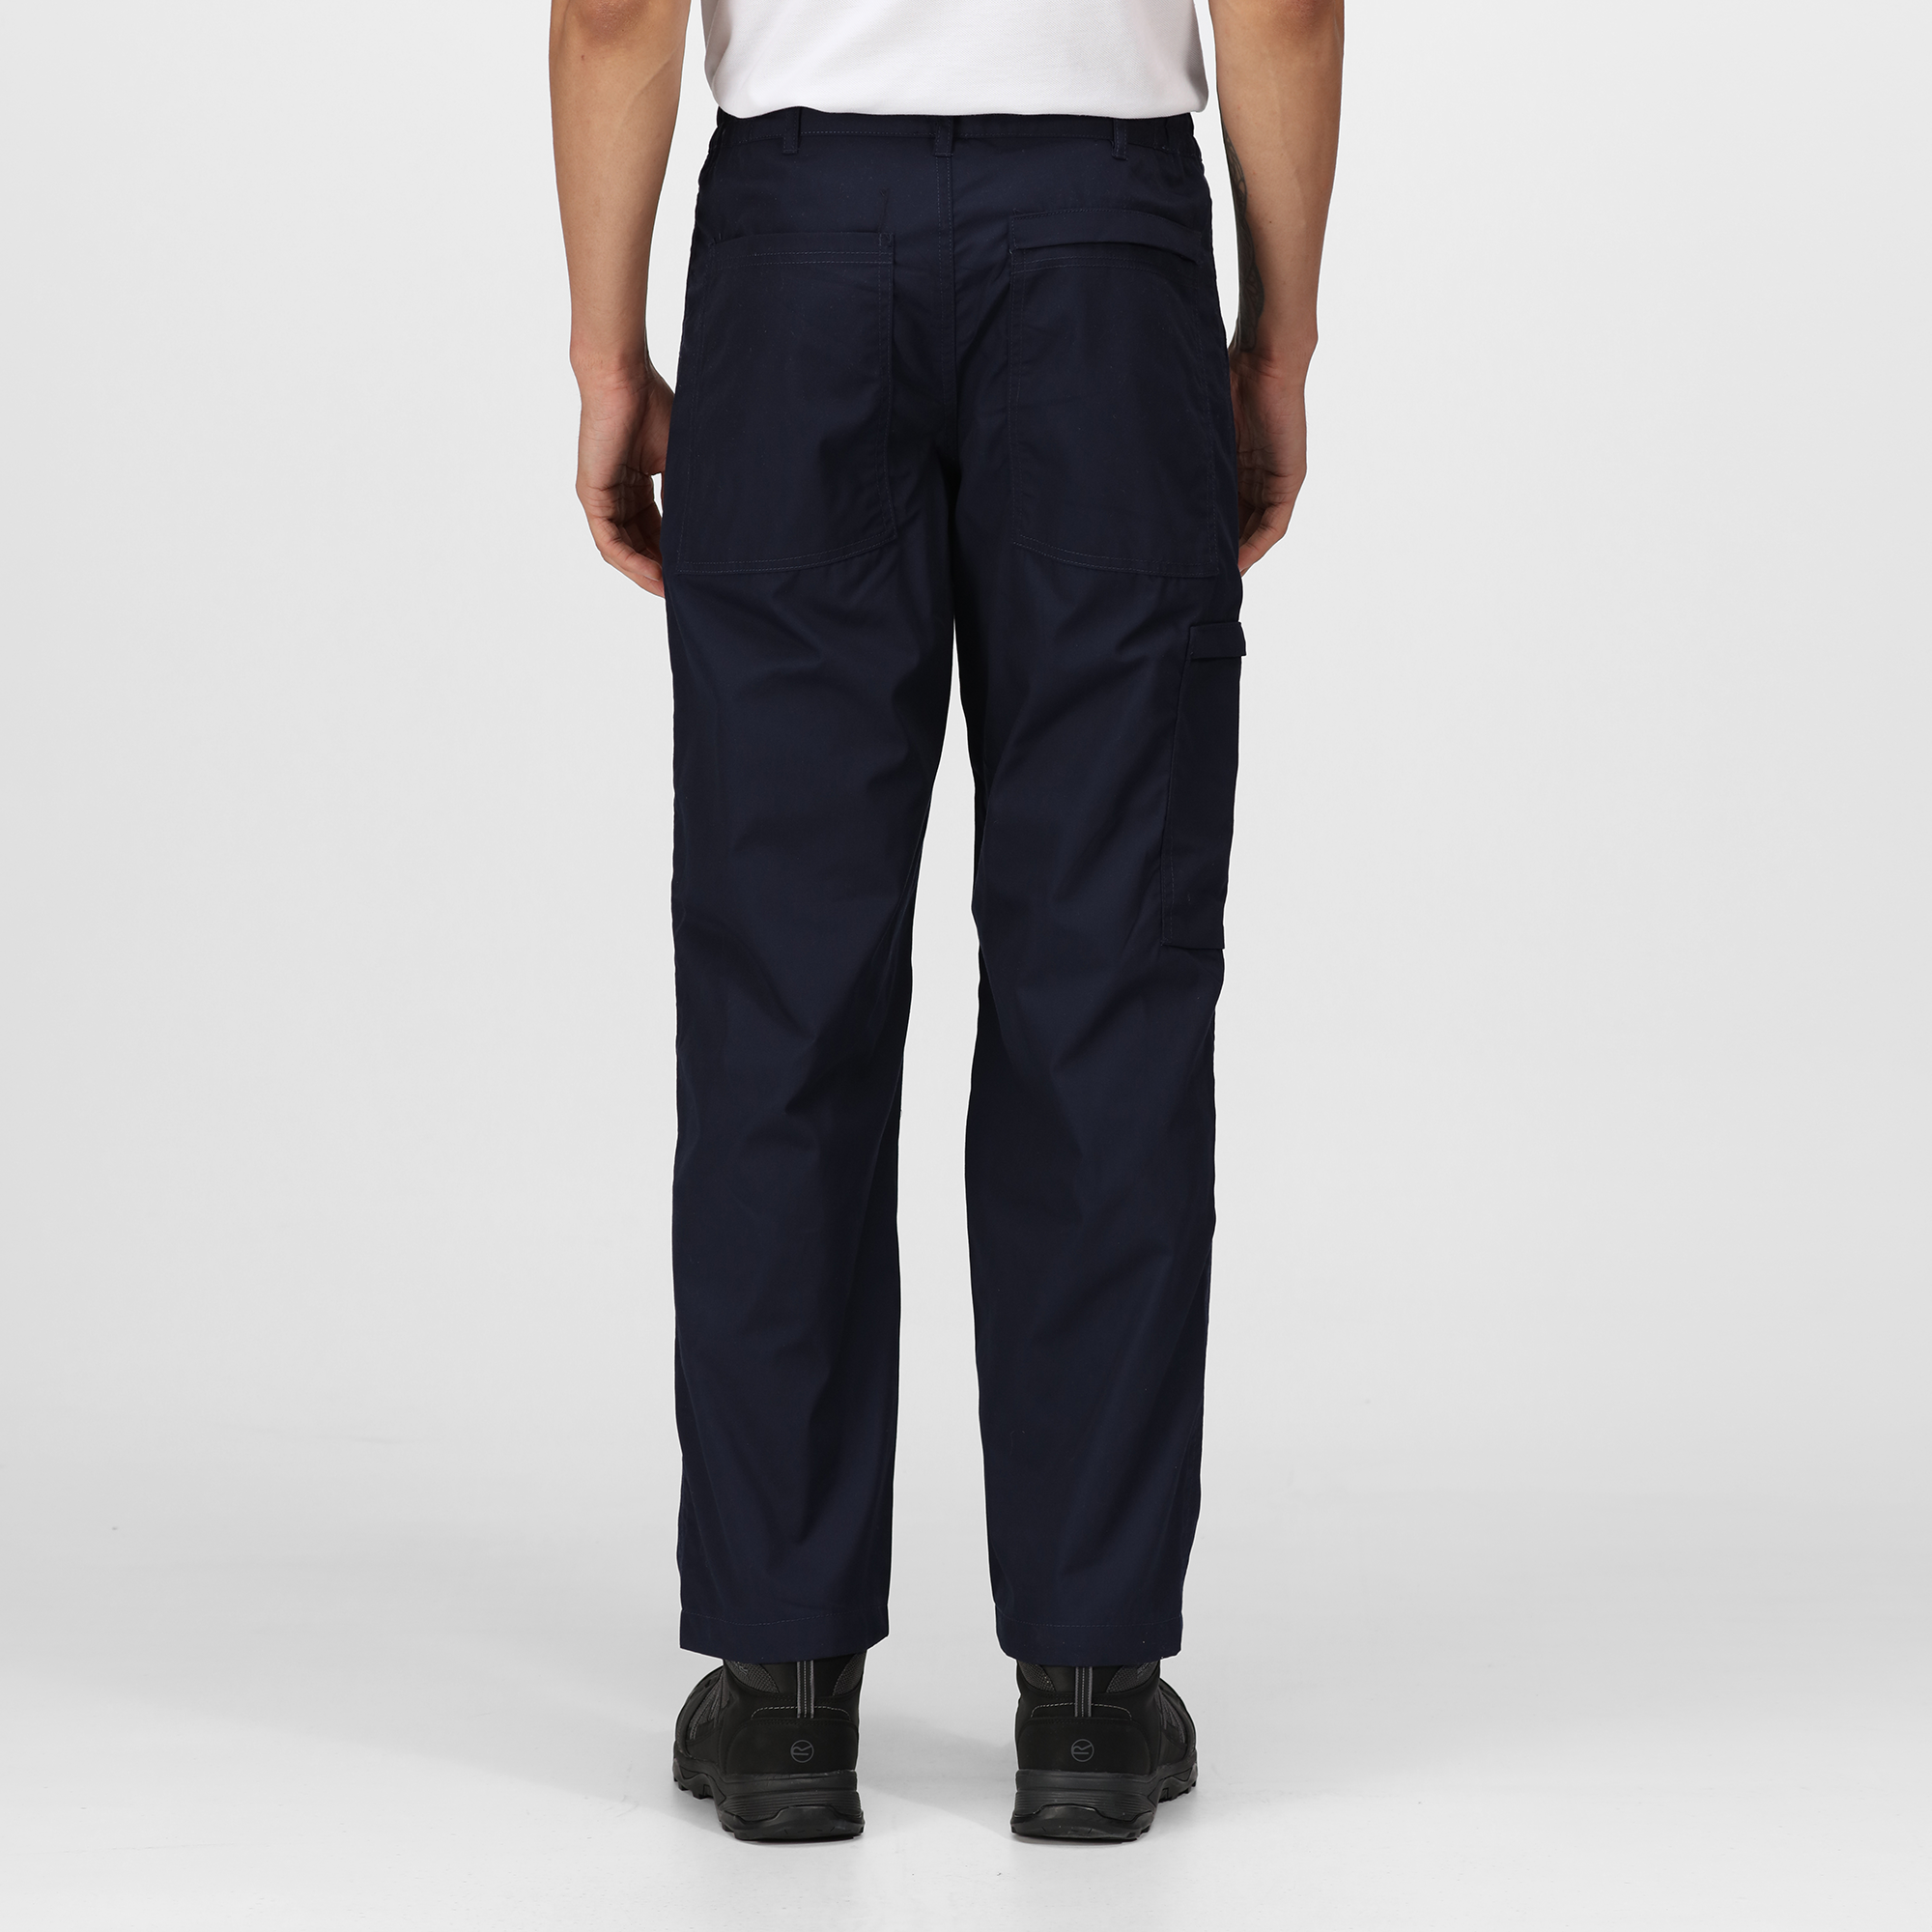 LINED ACTION TROUSERS - Regatta Professional